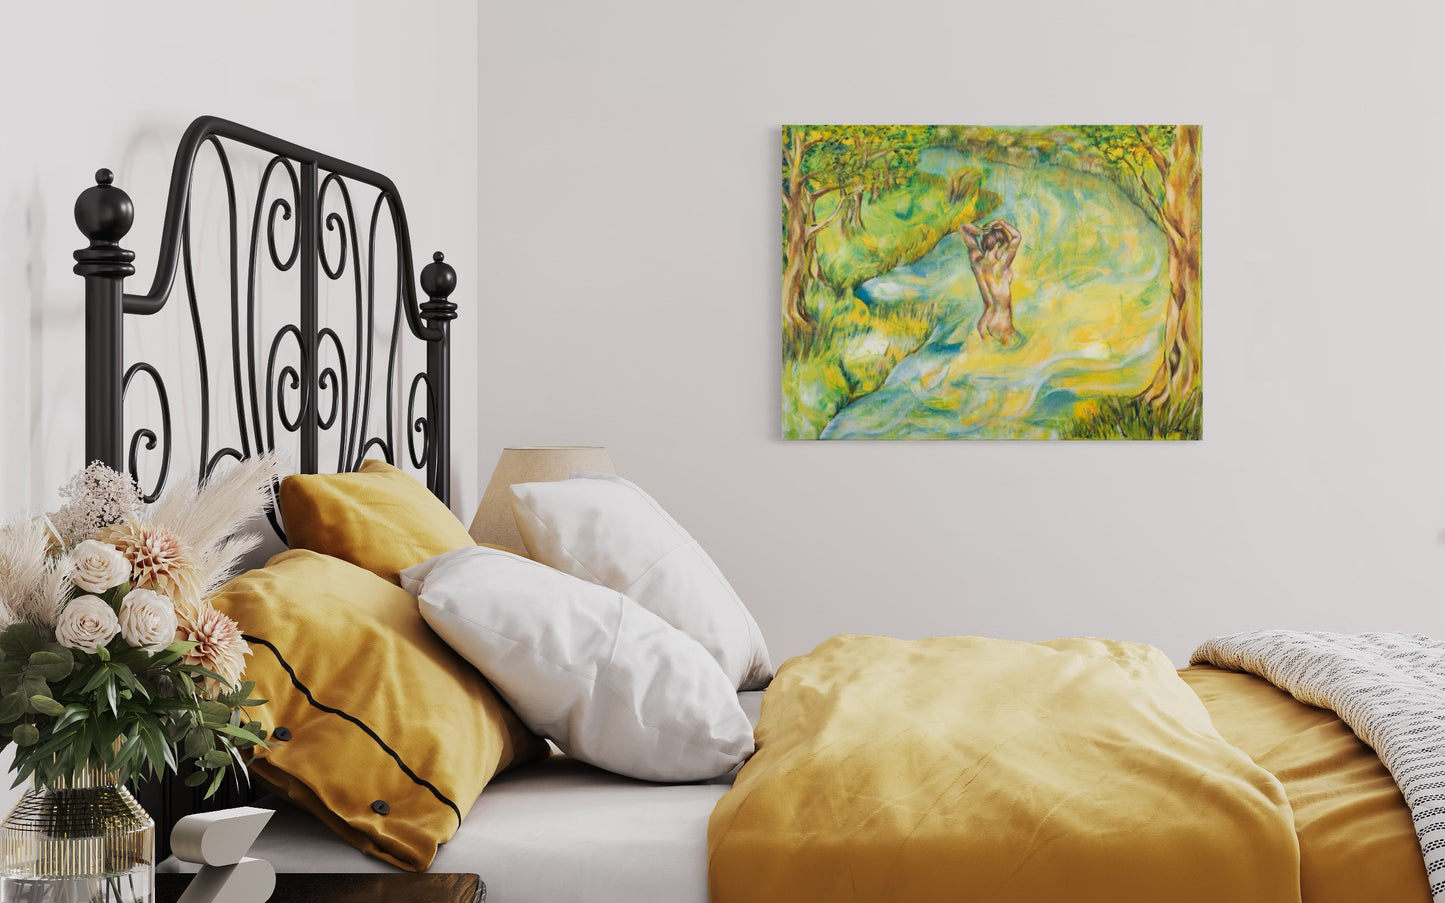 Bath, Oil painting on canva, for a natural, sensual and fresh feeling in the bedroom, Emmanuelle Erard Art